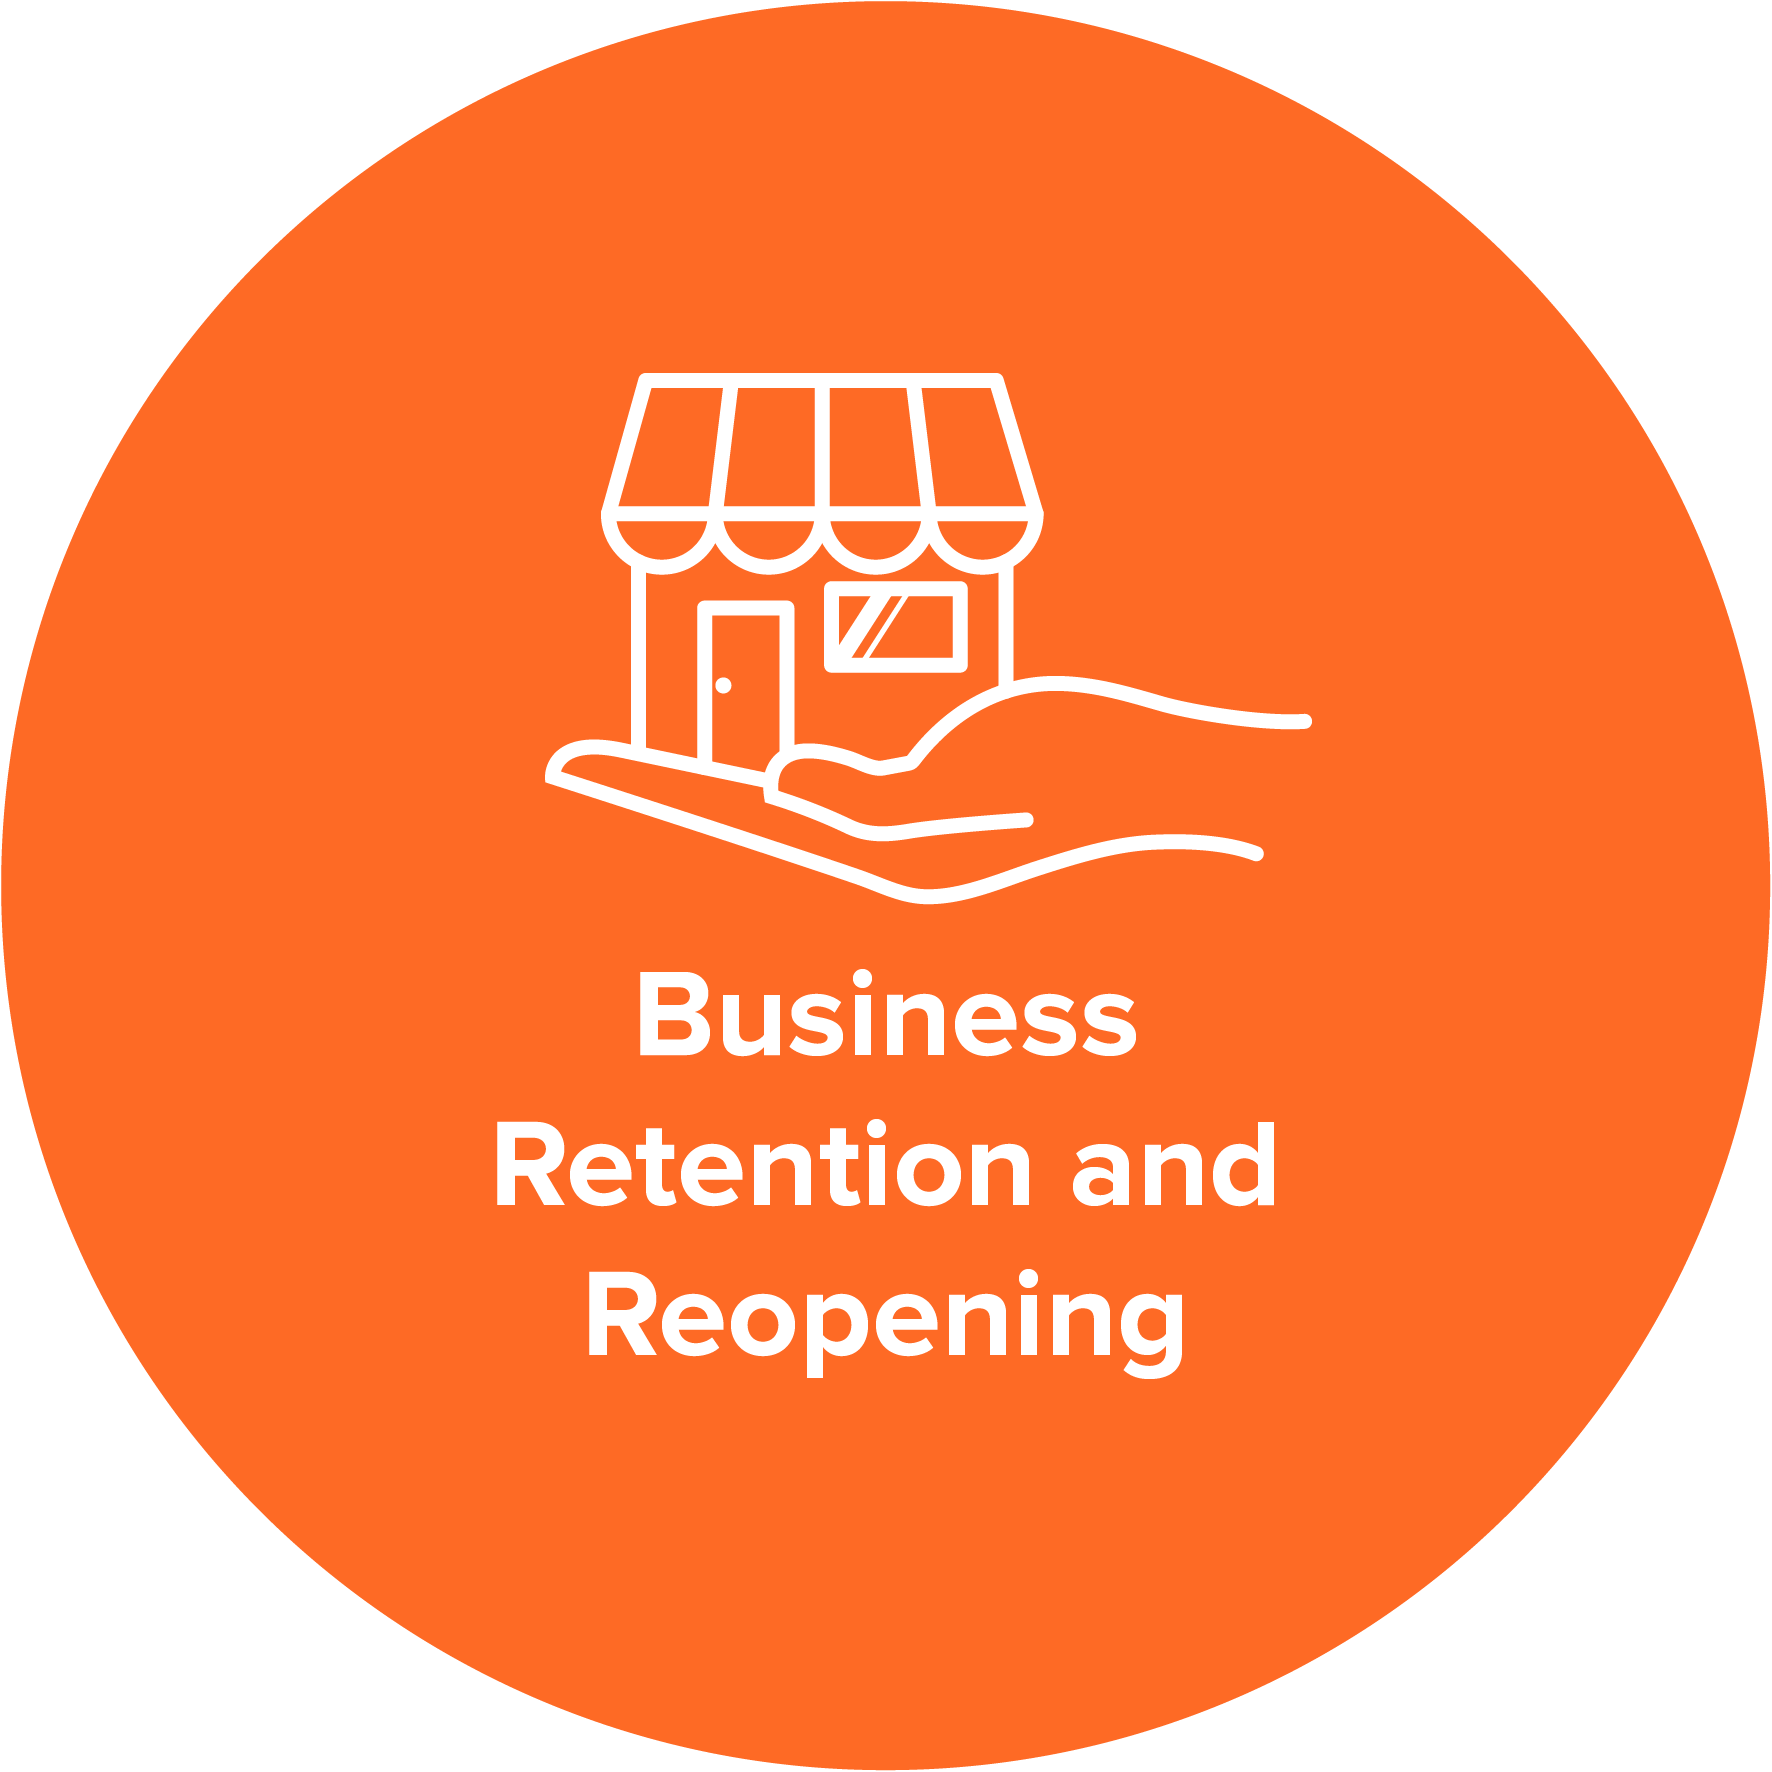 Business Retention and Reopening